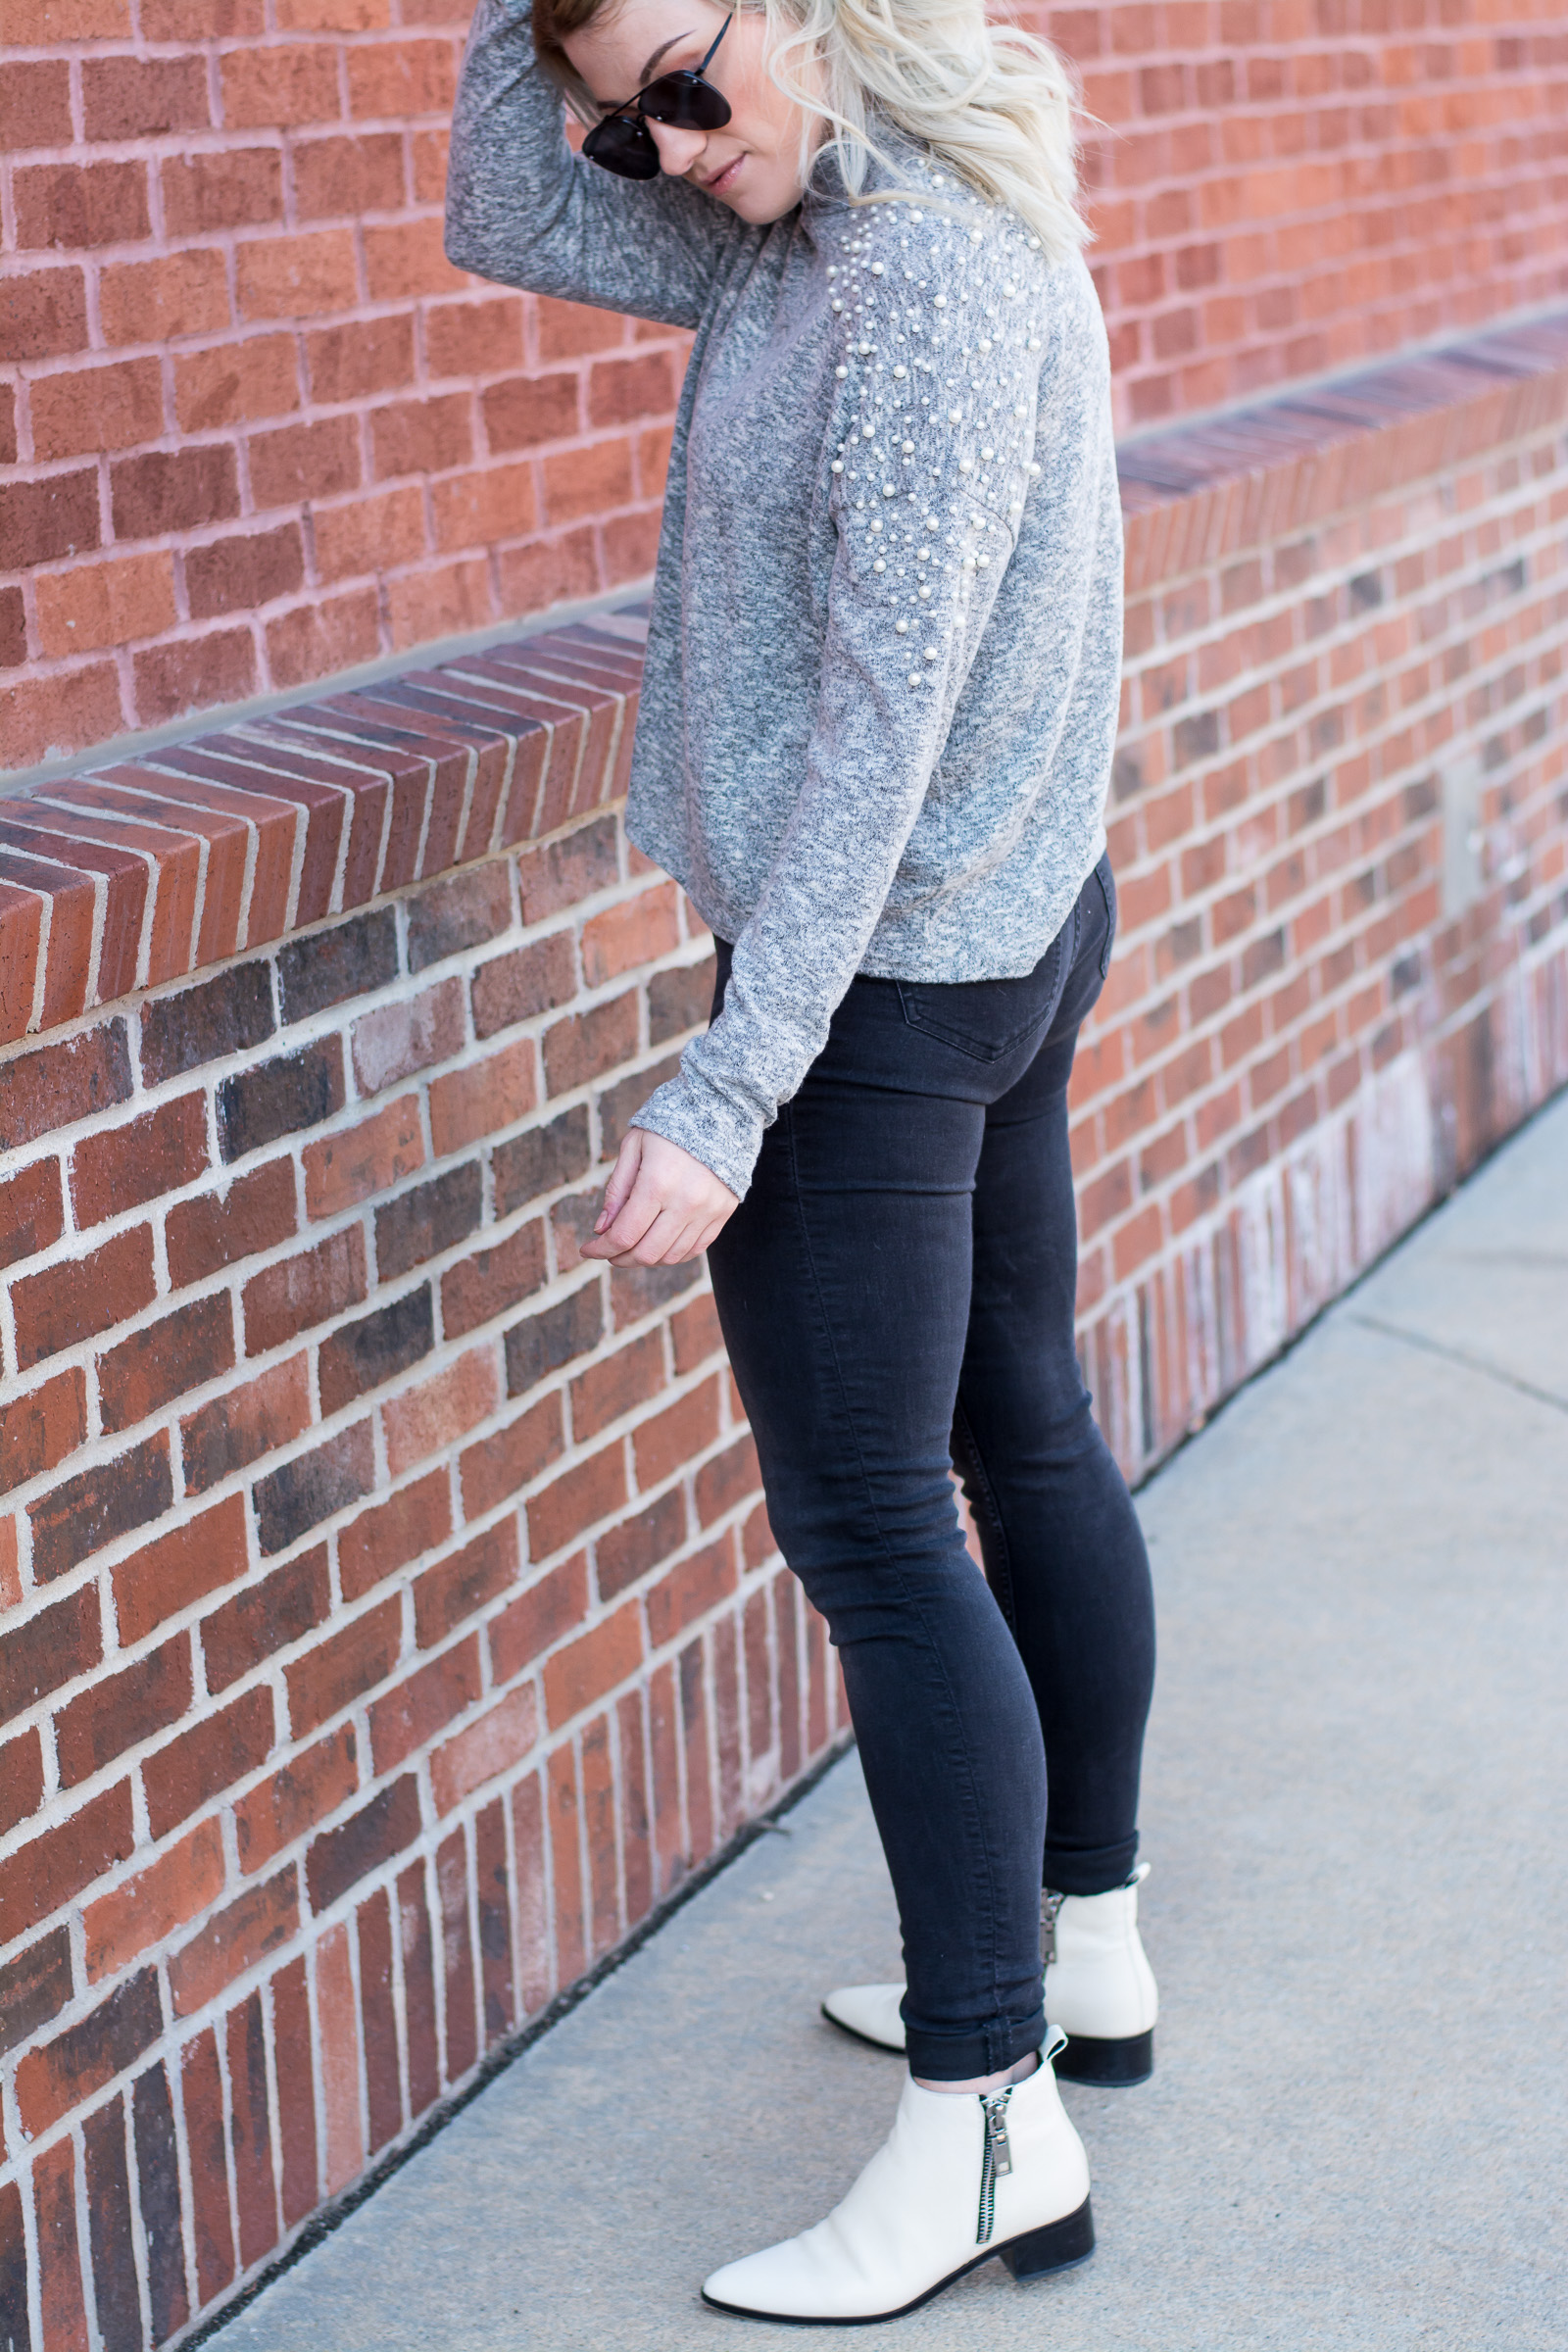 Pearl Sweater with Dark Denim + White Booties. | Le Stylo Rouge